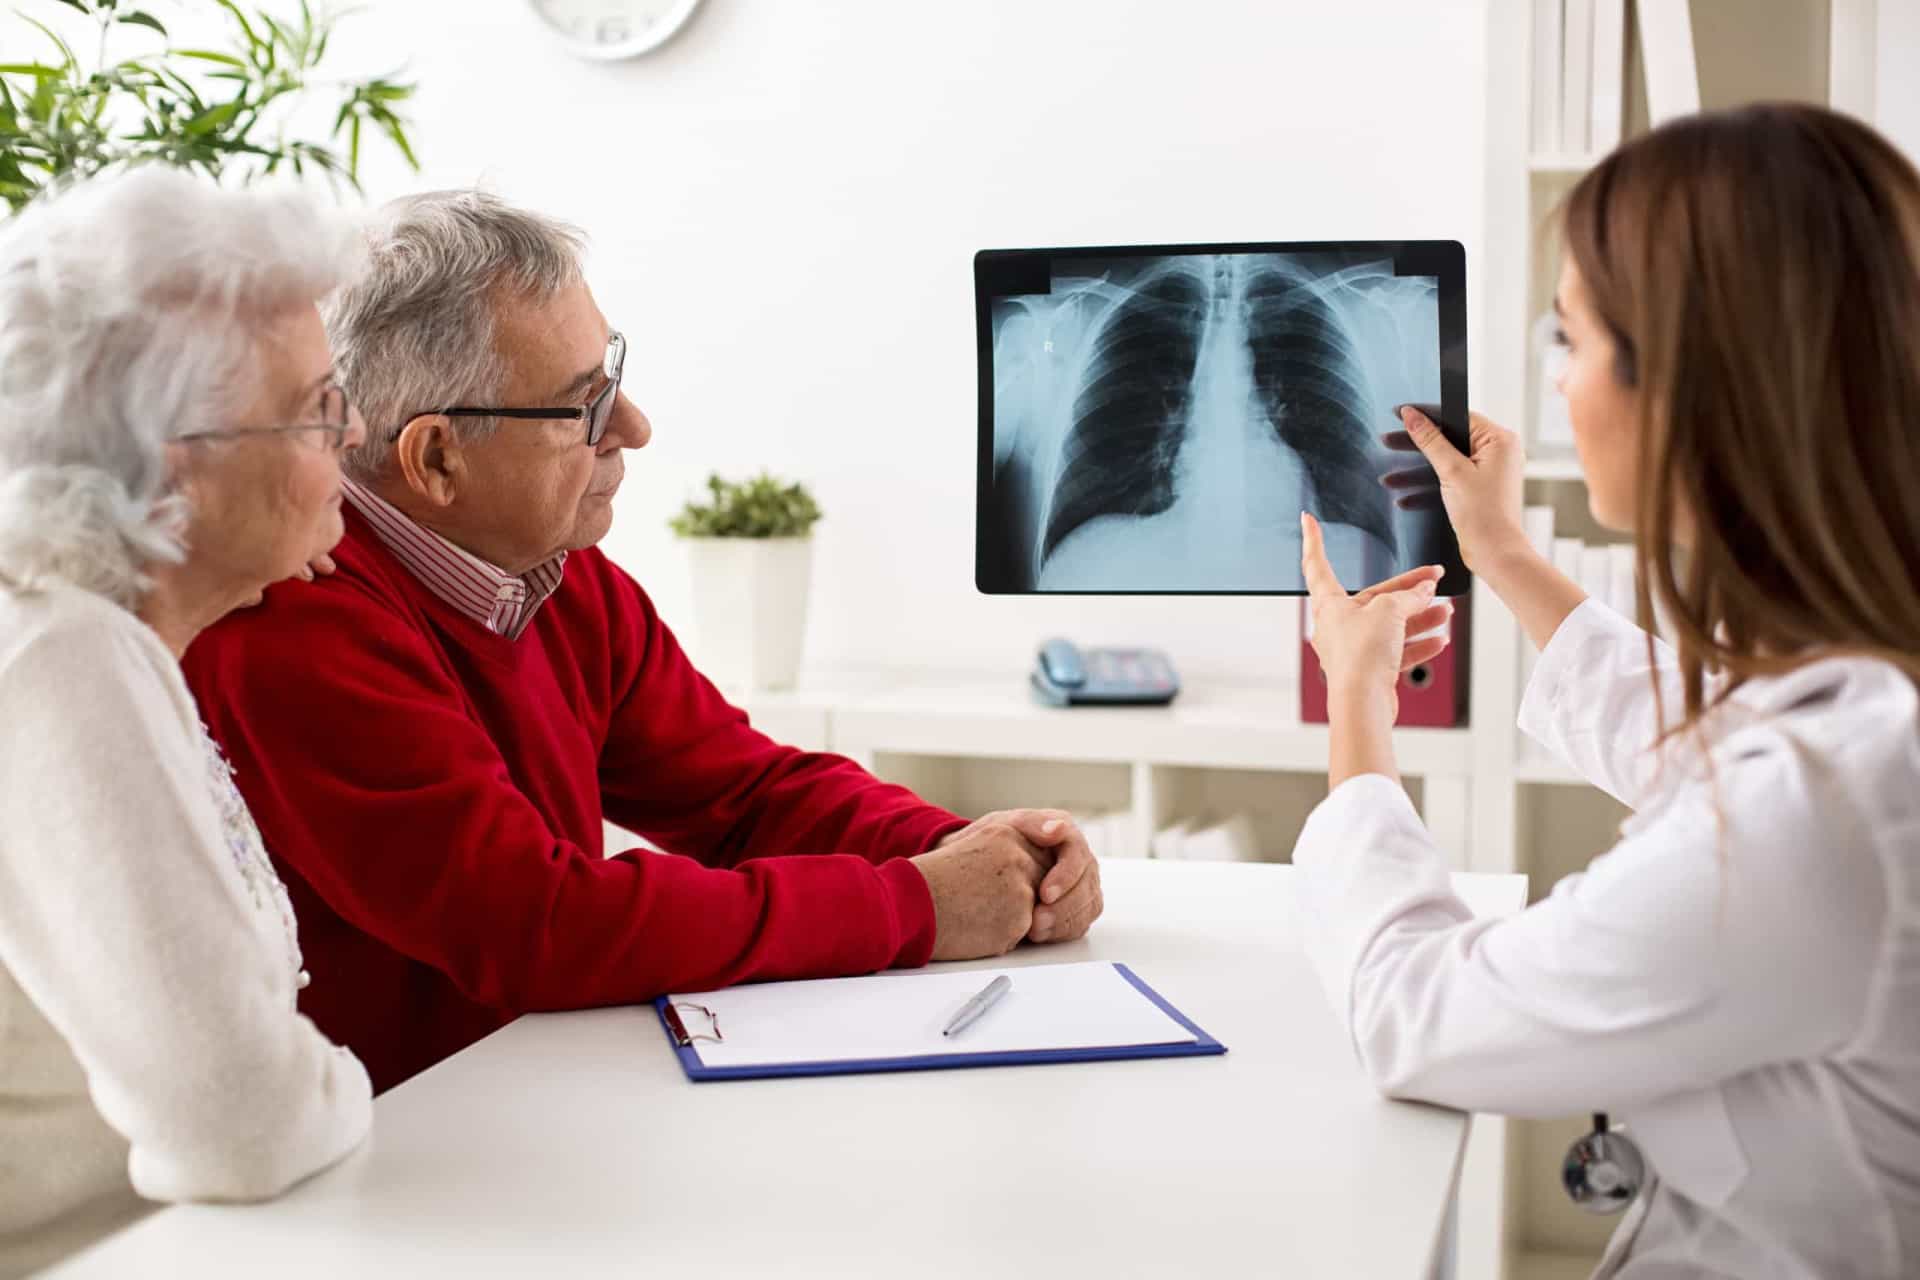 <p>People at risk, especially heavy smokers, should be screened, especially between the ages of 50 and 80.</p><p><a href="https://www.msn.com/en-us/community/channel/vid-7xx8mnucu55yw63we9va2gwr7uihbxwc68fxqp25x6tg4ftibpra?cvid=94631541bc0f4f89bfd59158d696ad7e">Follow us and access great exclusive content everyday</a></p>